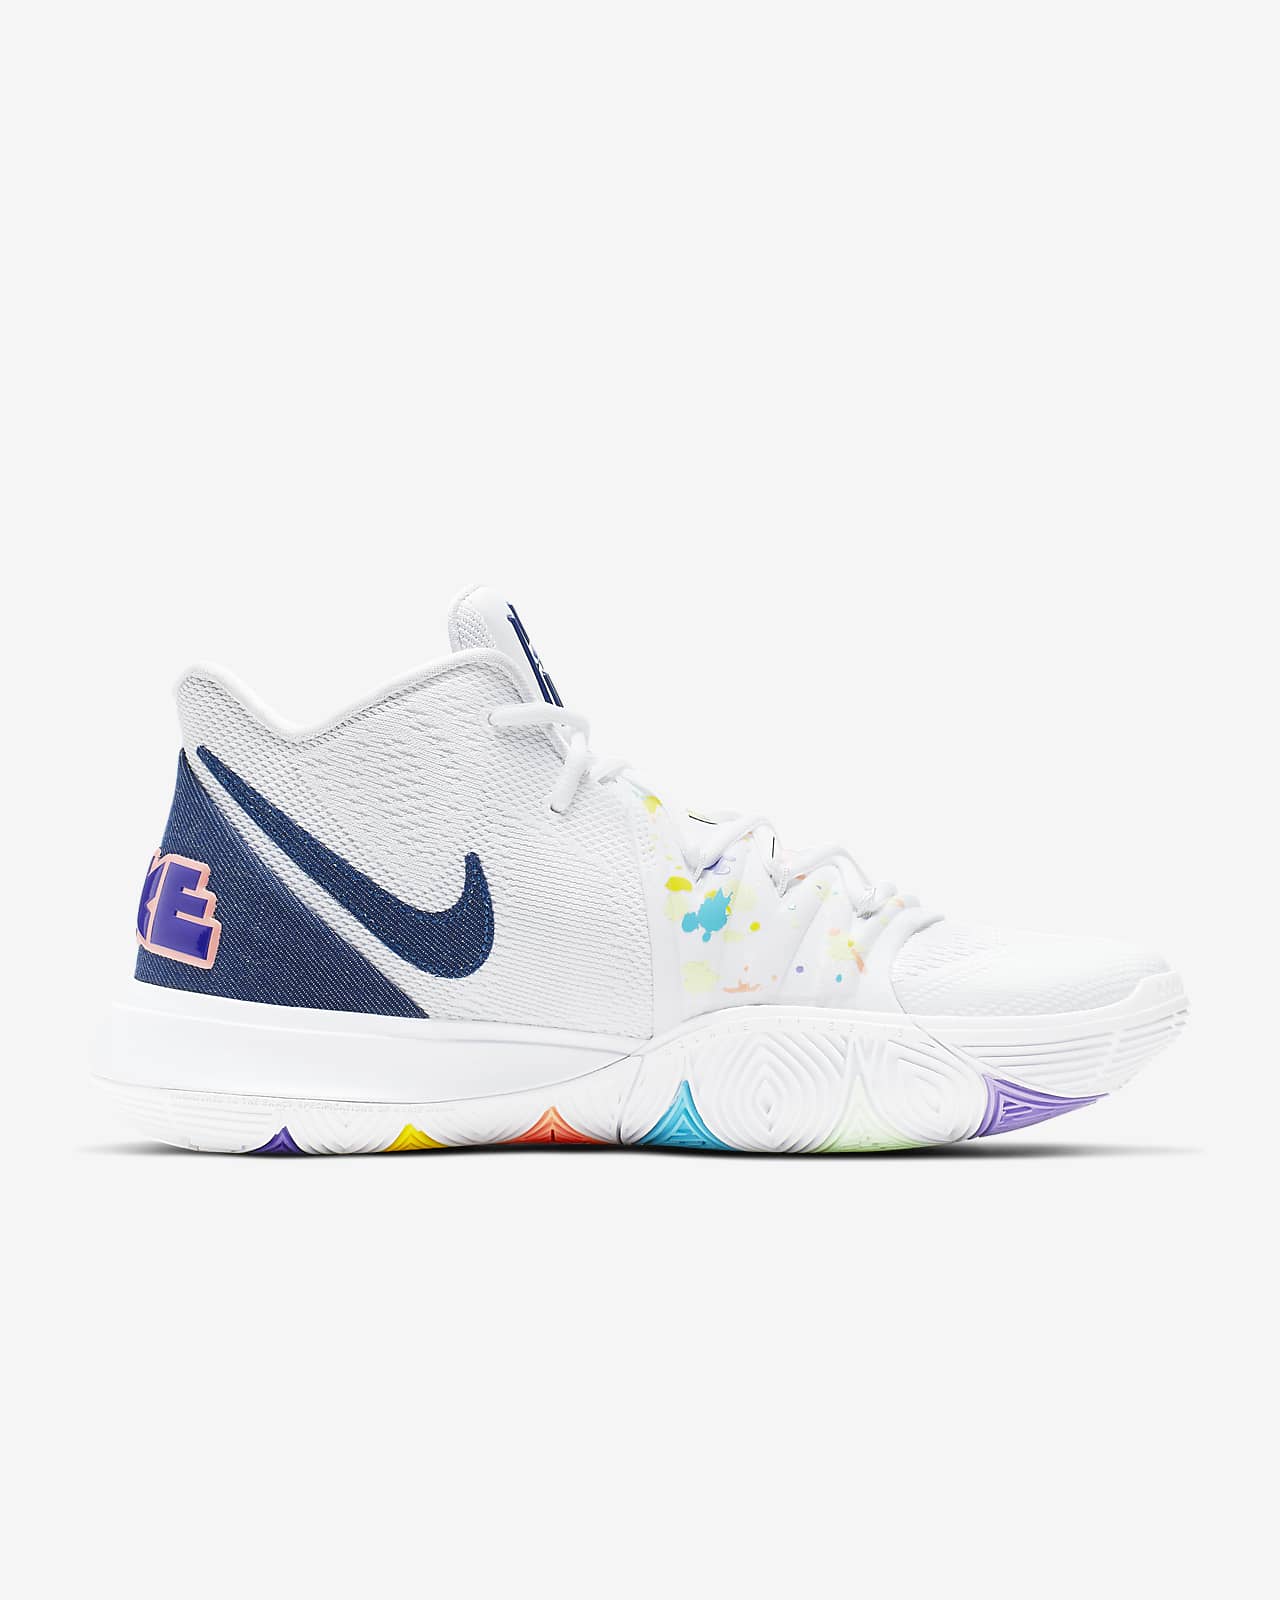 kyrie irving shoes id